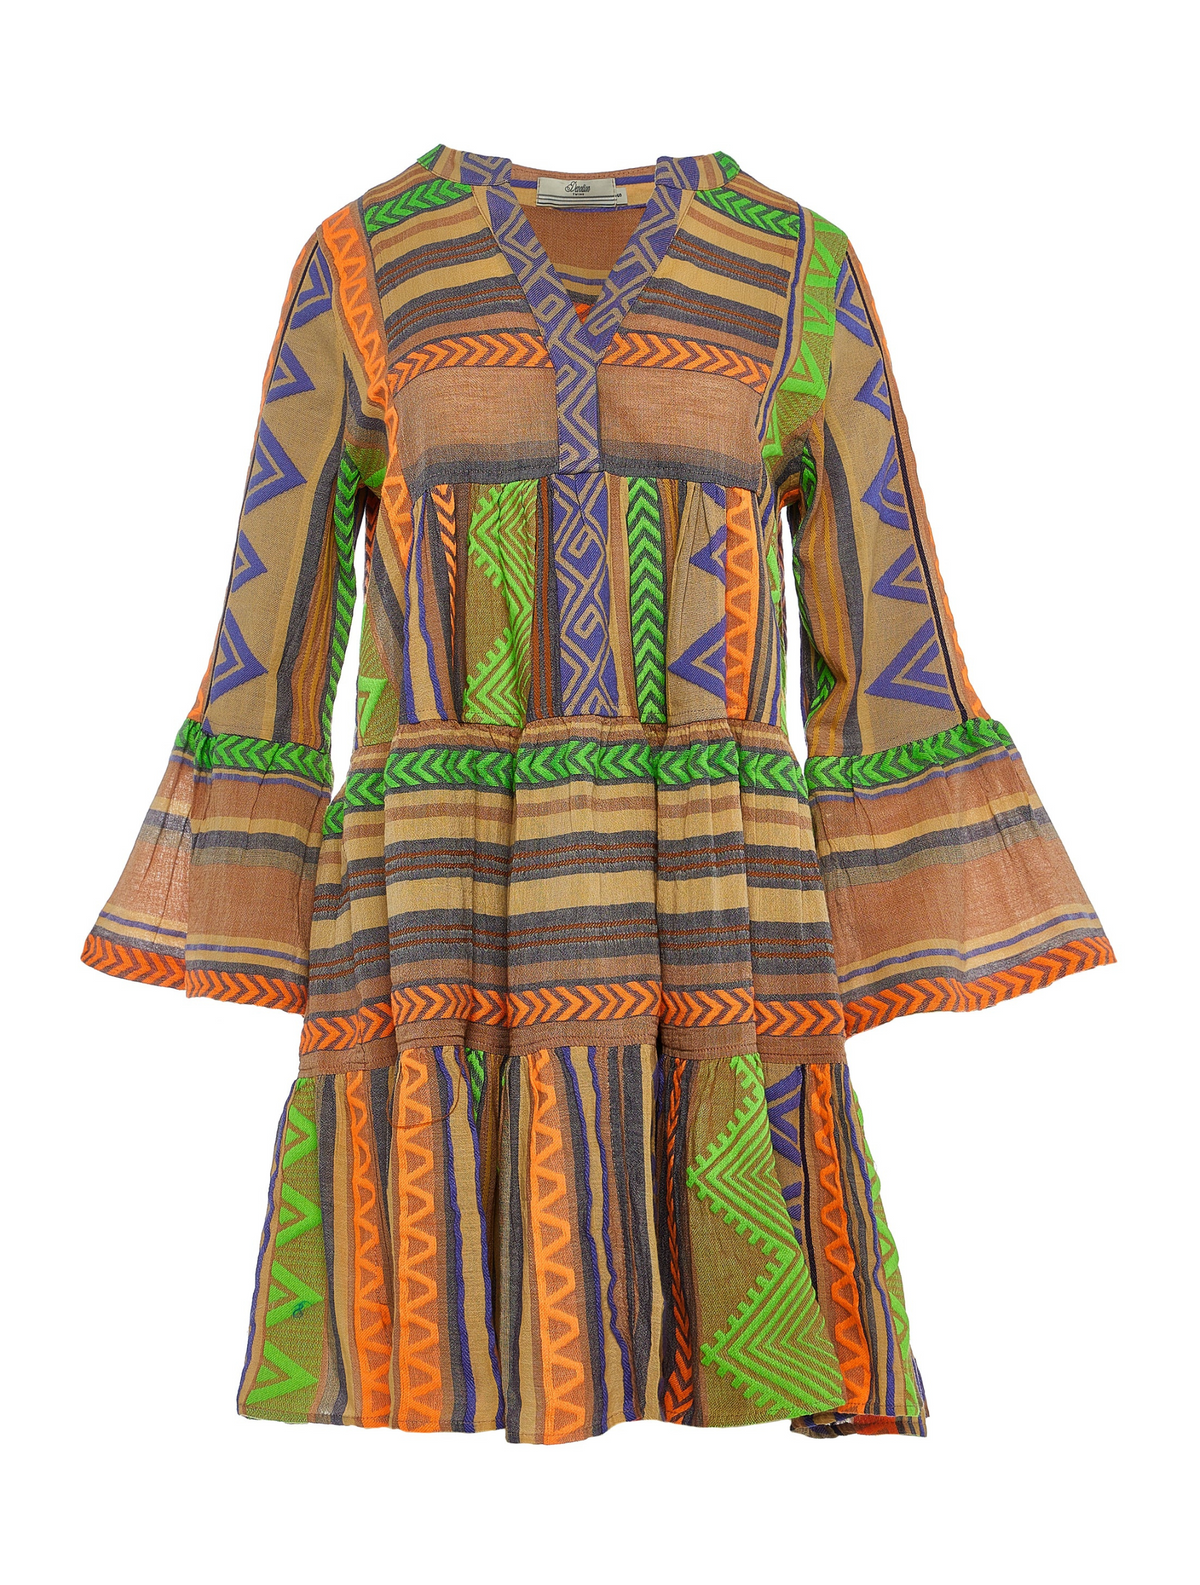 Biege notch neck beach dress with long fluted sleeves and tiered skirt with neon green orange and purple embroidery